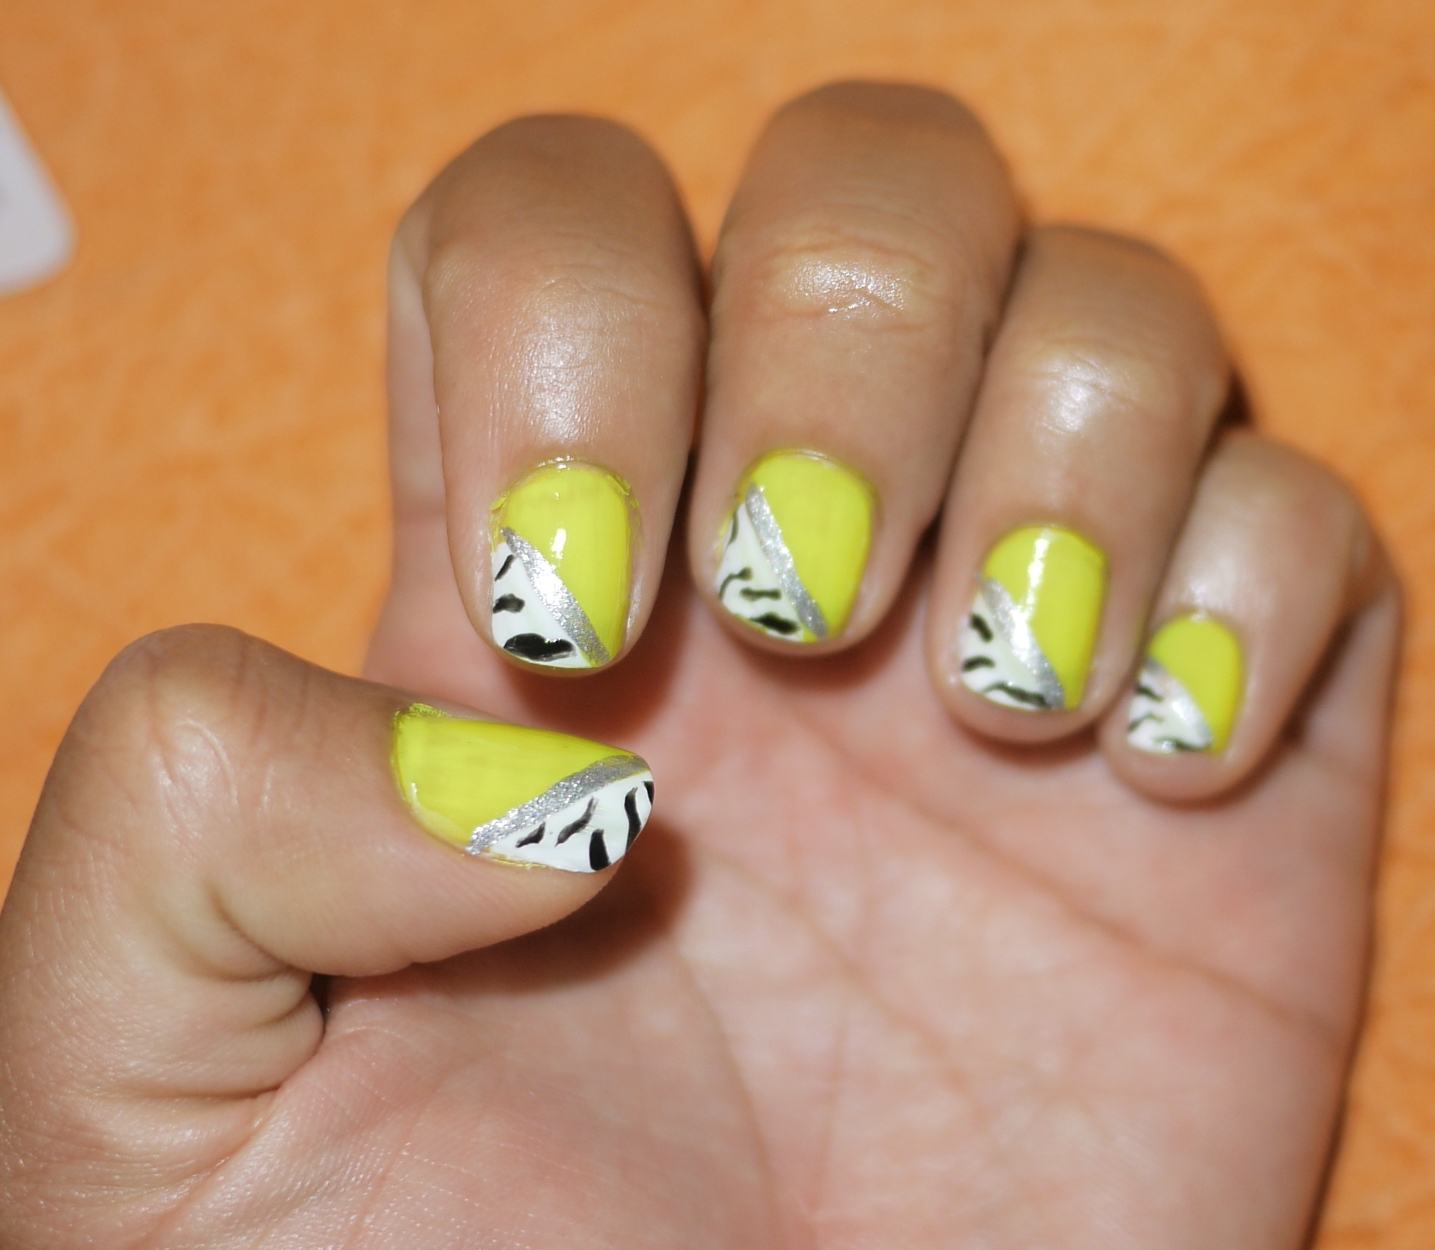 DIY Nails Step 4: Drew random black lines to give it an animal pattern ...